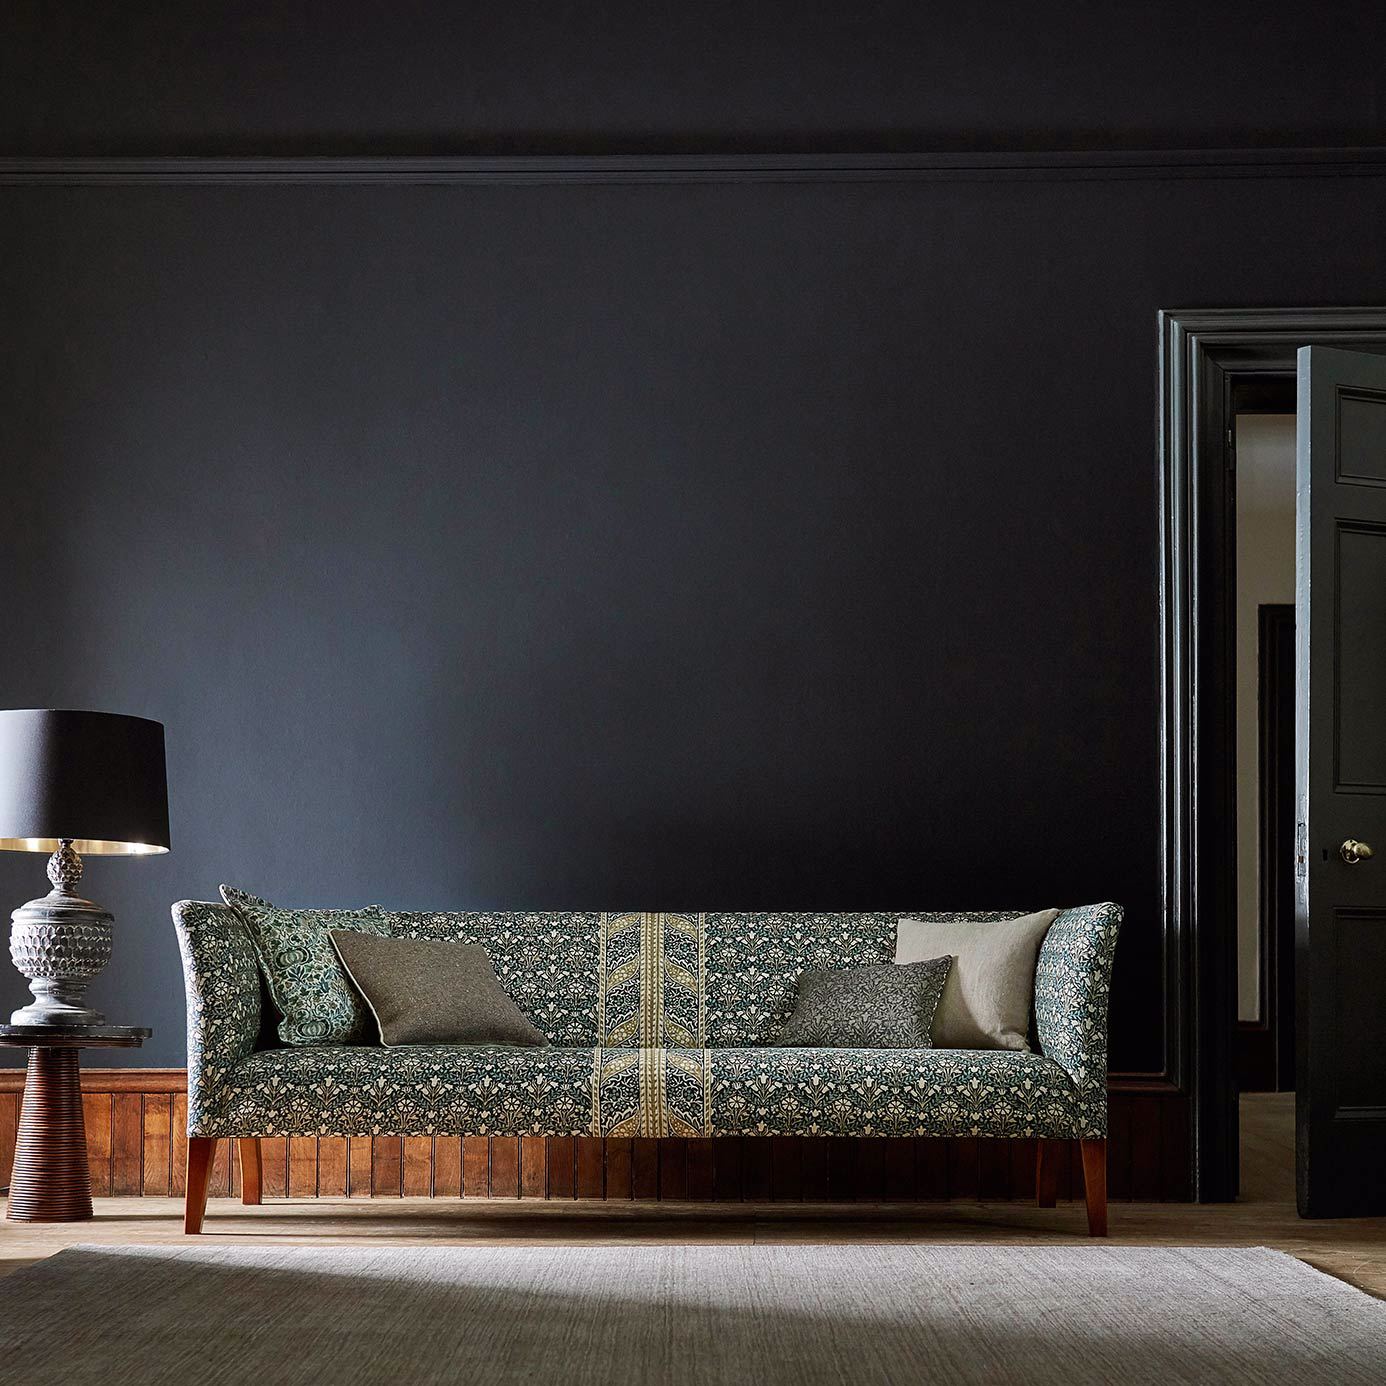 Elegant but traditional sofa in a room painted black